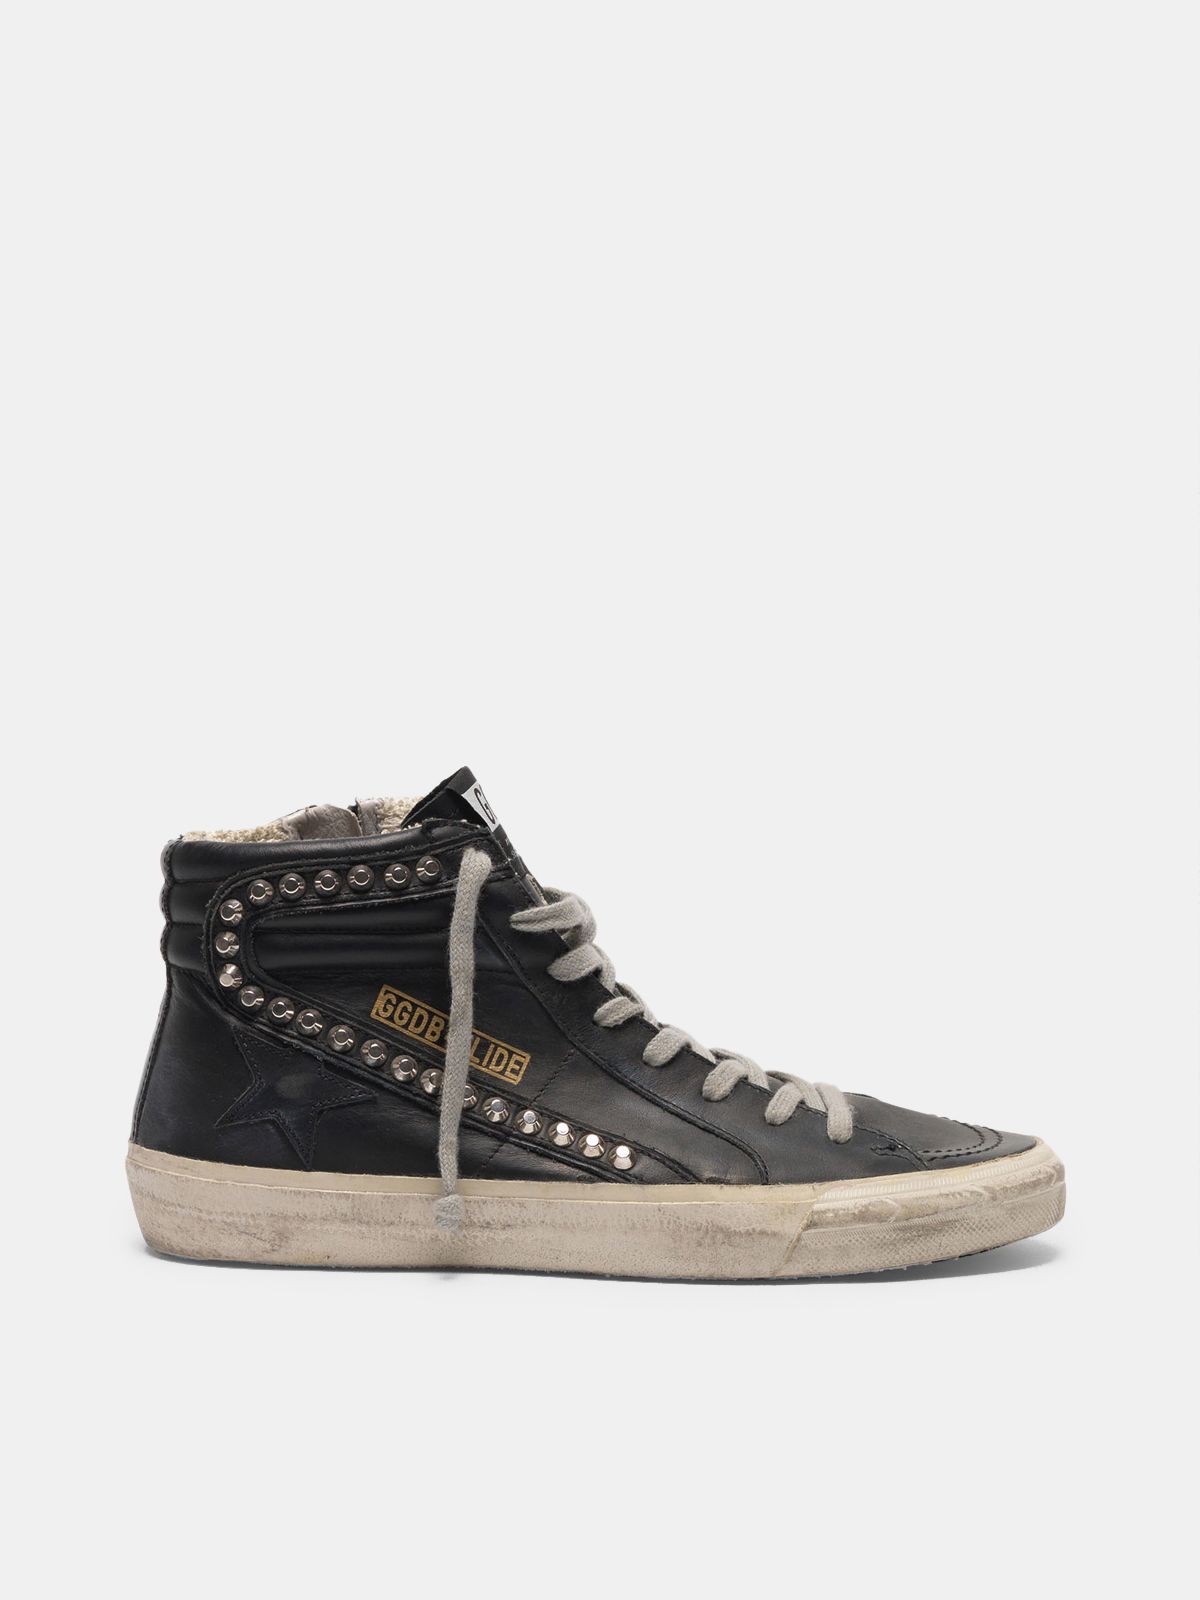 Golden Goose Donna Sneakers Slide sneakers in metal studded leather